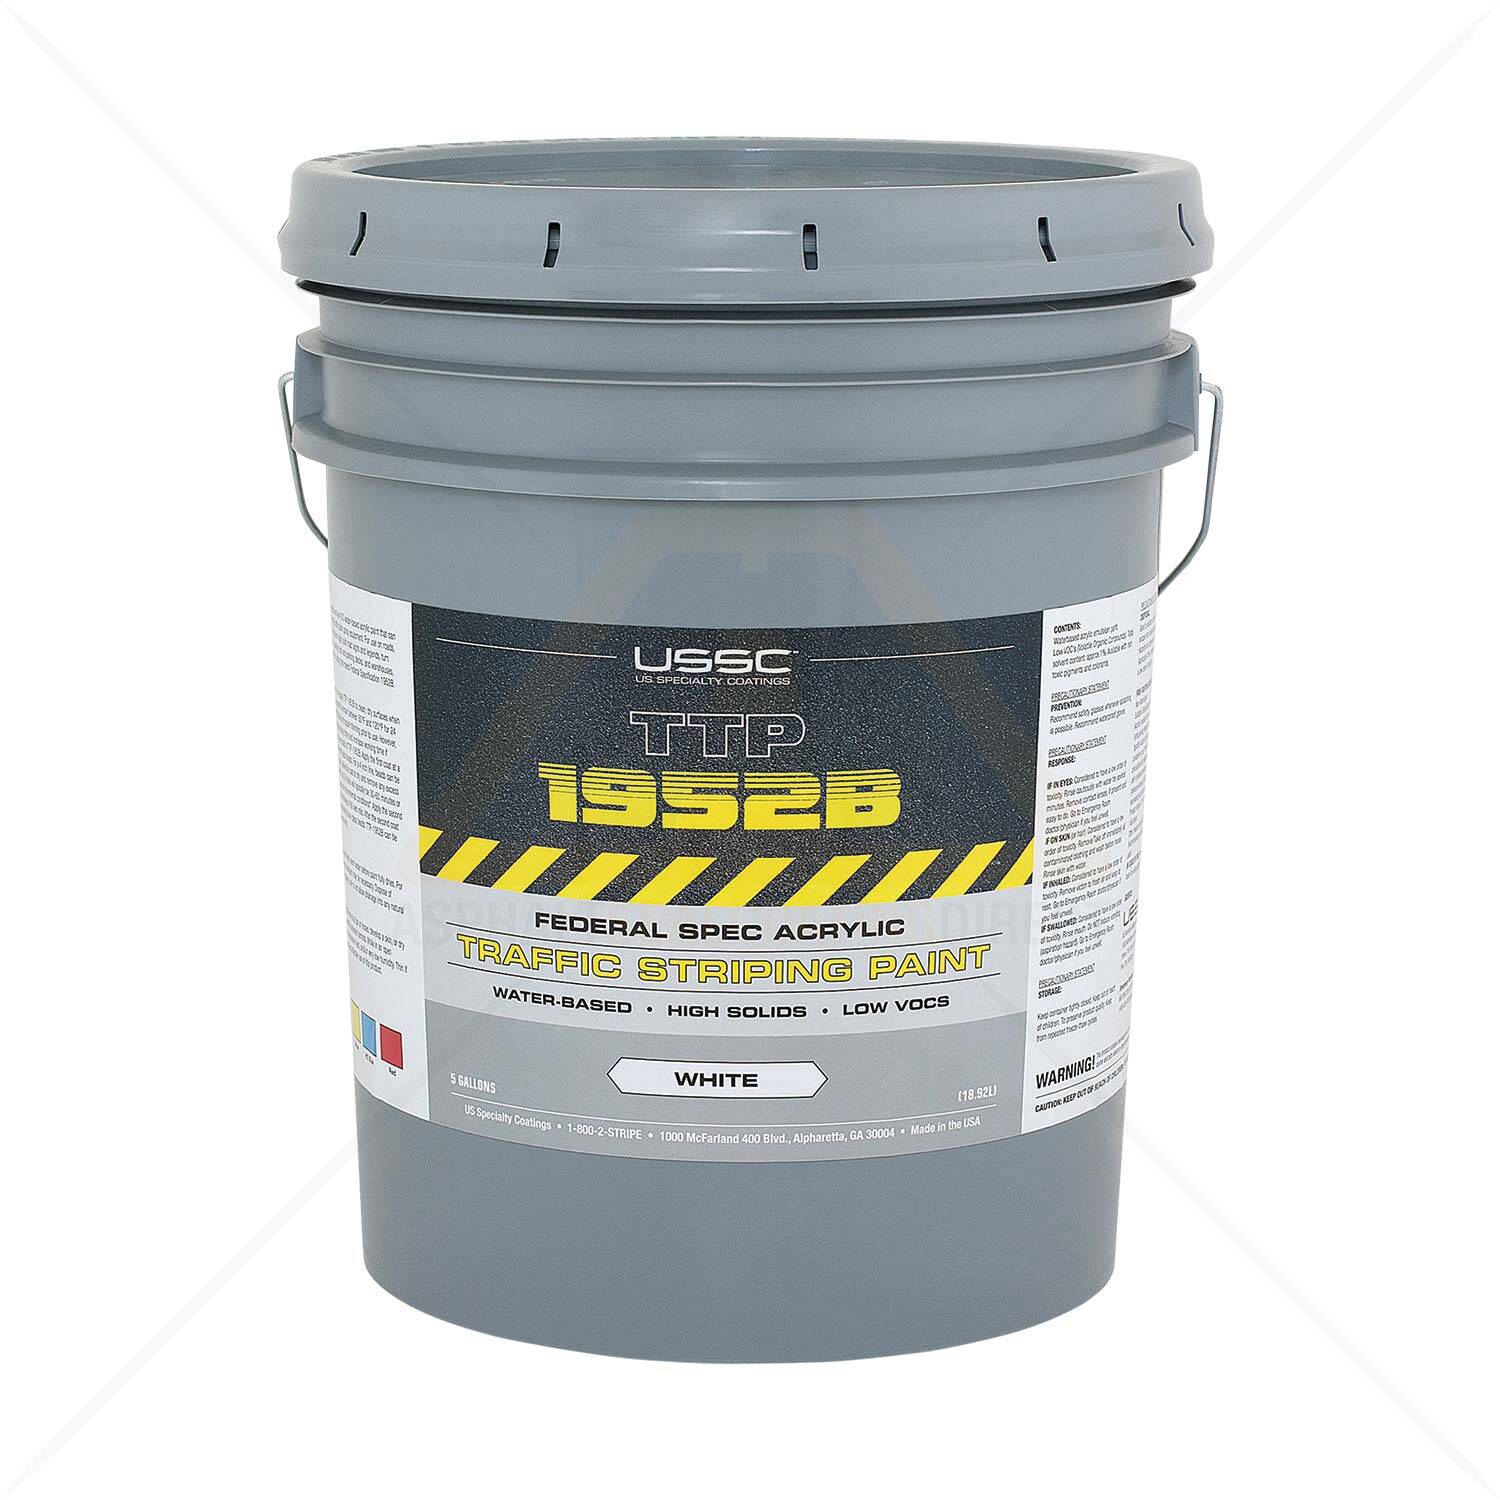 How Much Can A 5 Gallon Paint Cover - Visual Motley How Much Paint Does A 5 Gallon Bucket Cover